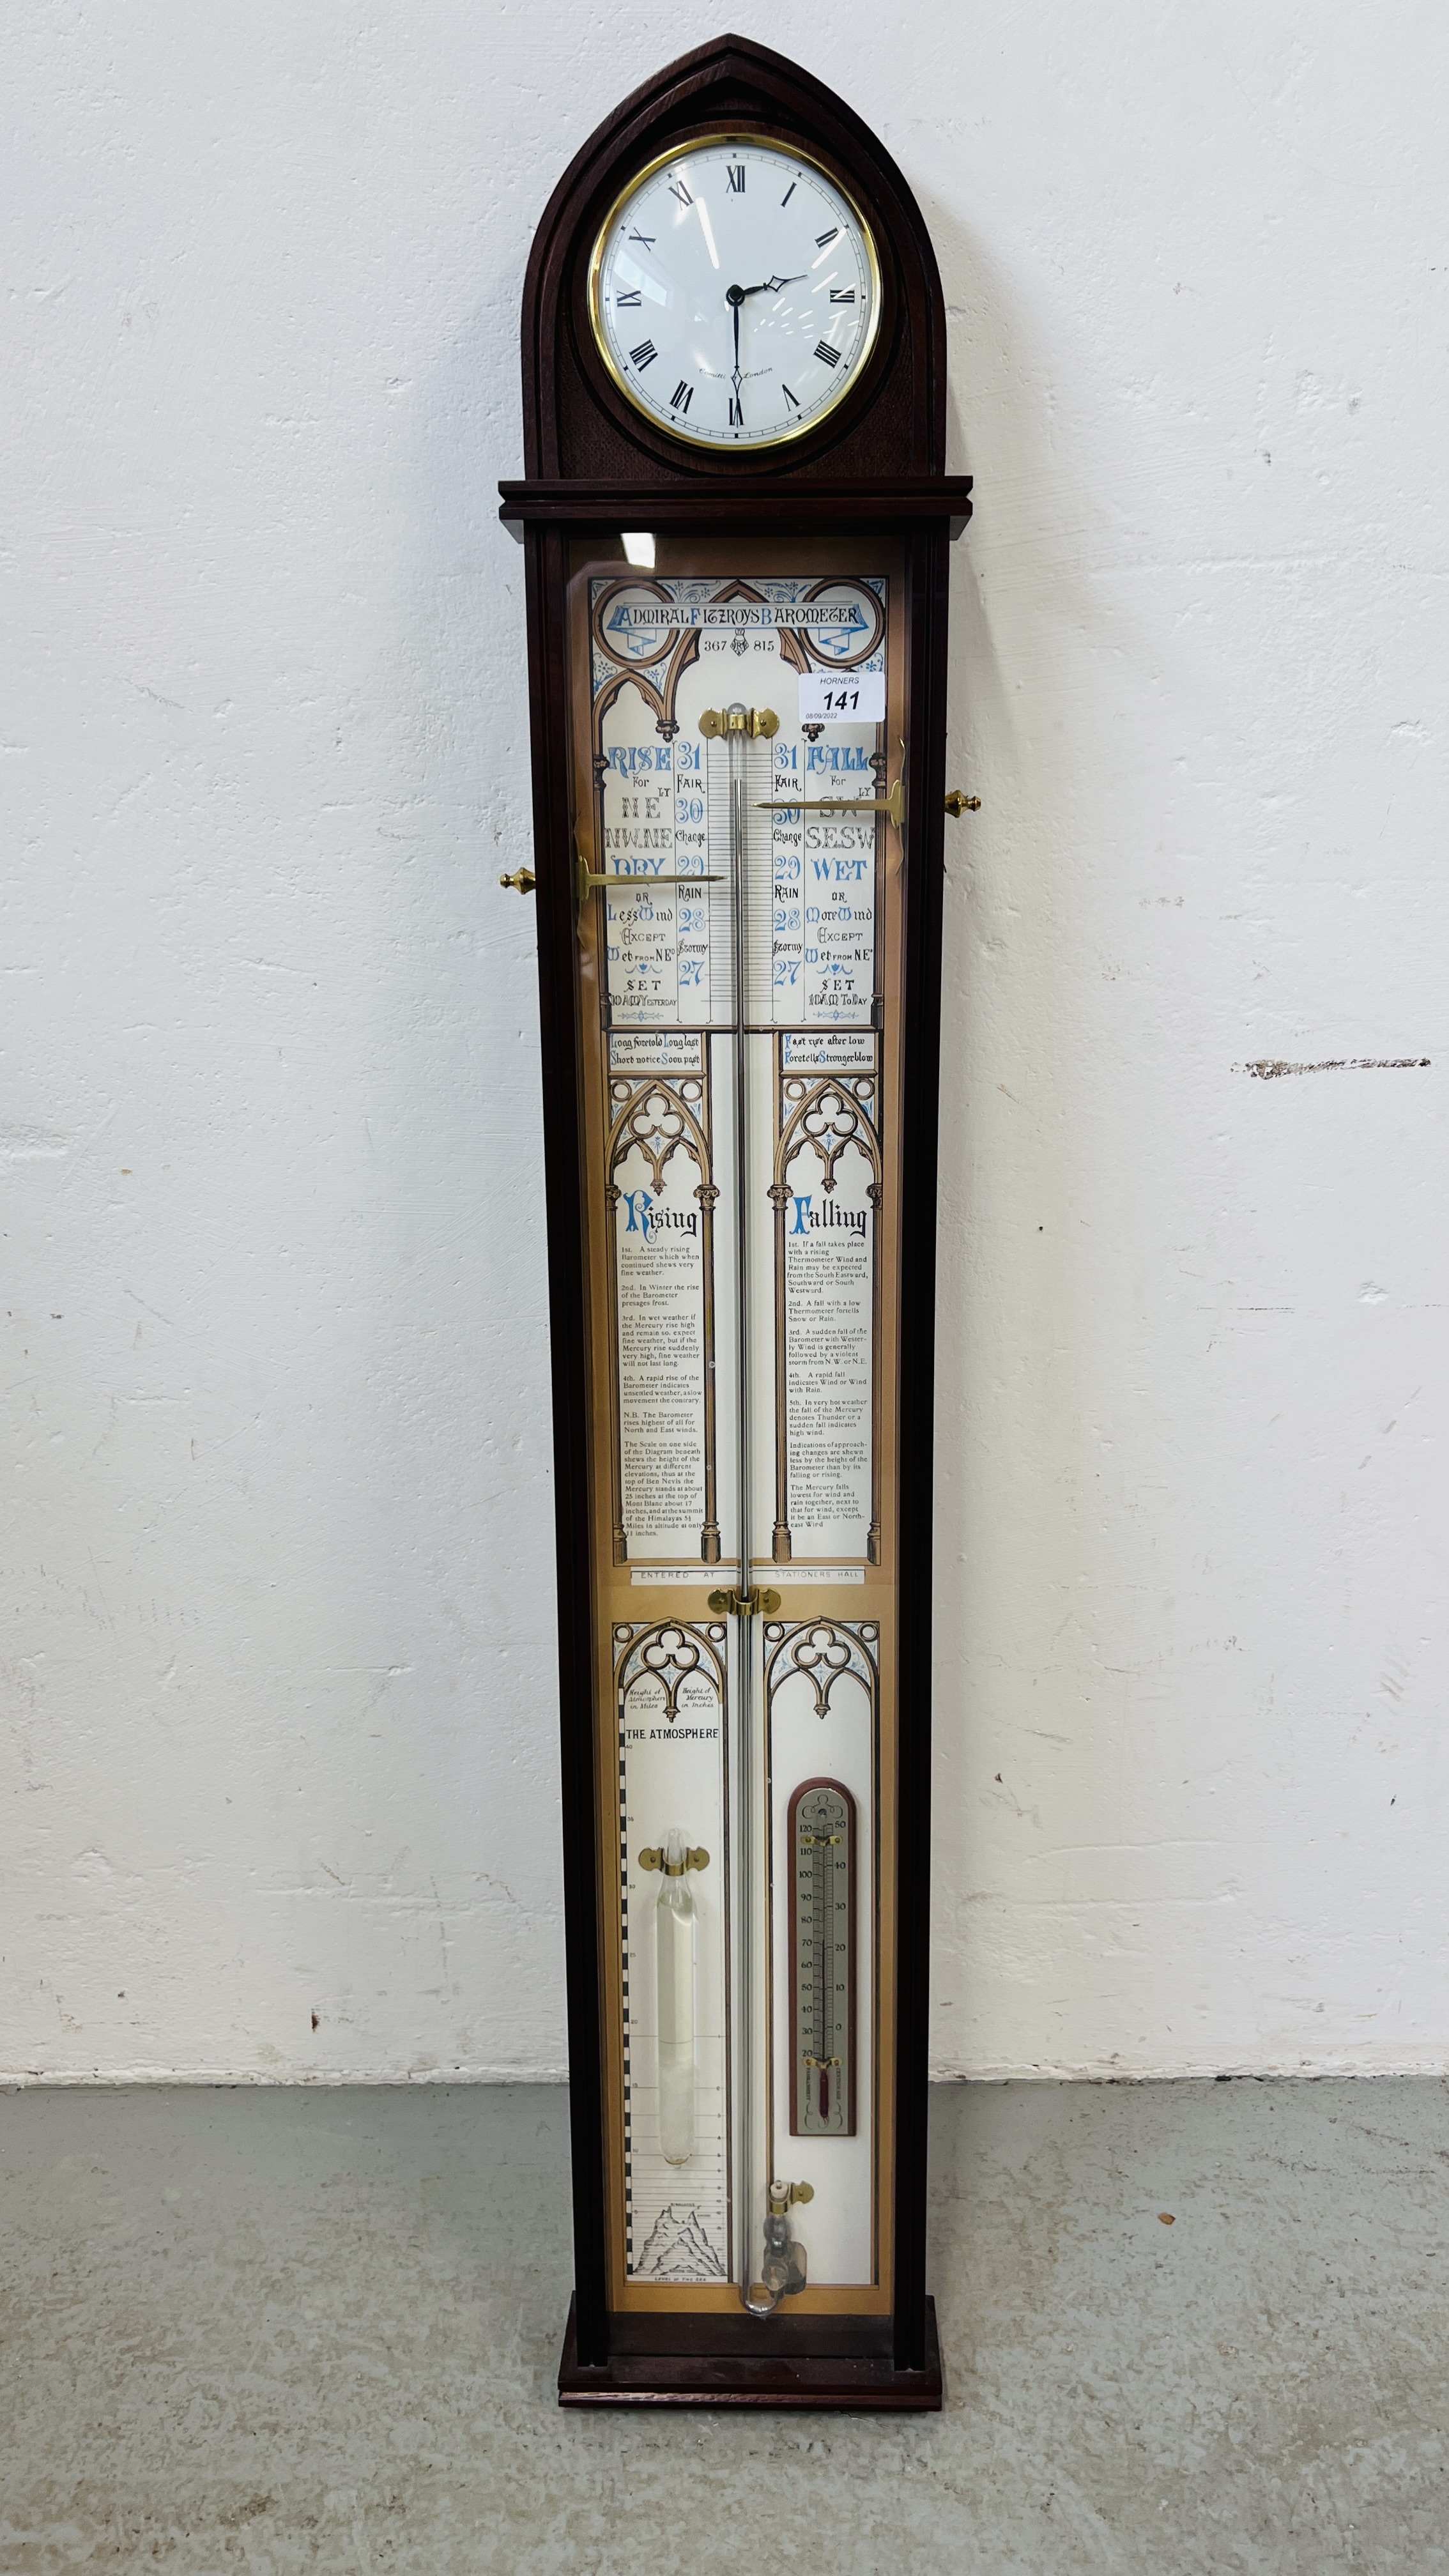 A REPRODUCTION COMITTI OF LONDON ADMIRAL FITZROY MERCURIAL BAROMETER.